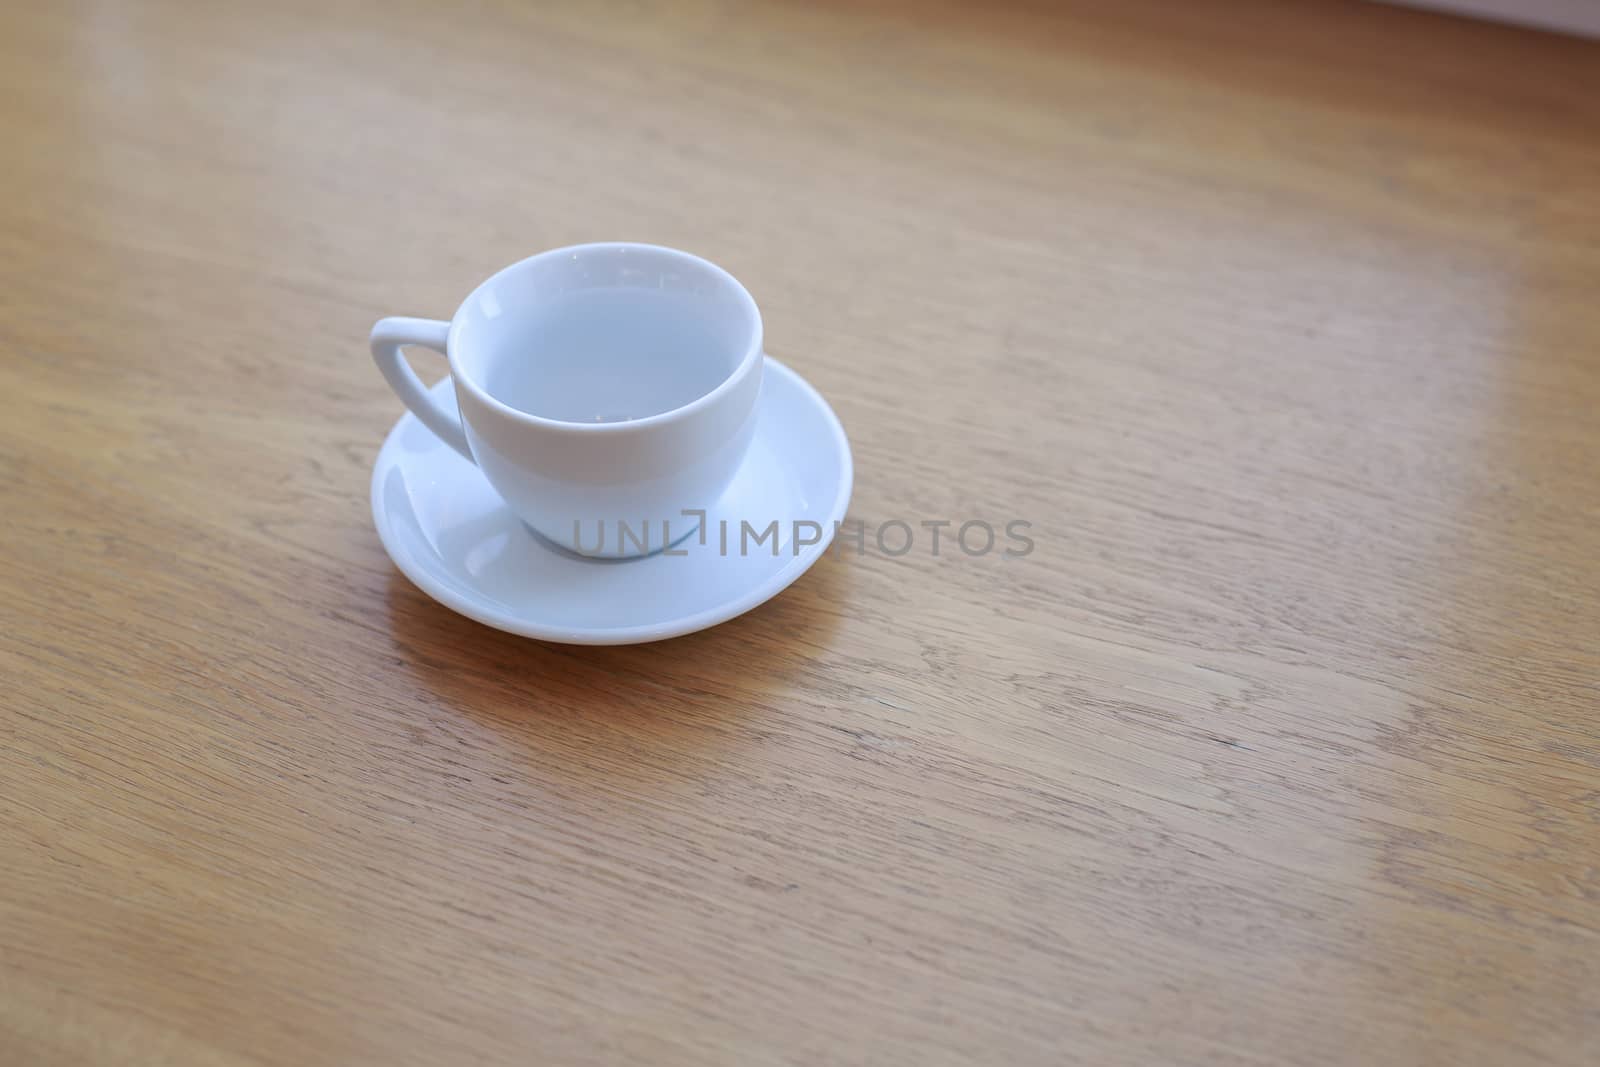 one pure white ceramic Cup and saucer without drink sits on a wooden table in the afternoon sunlight by dikkens